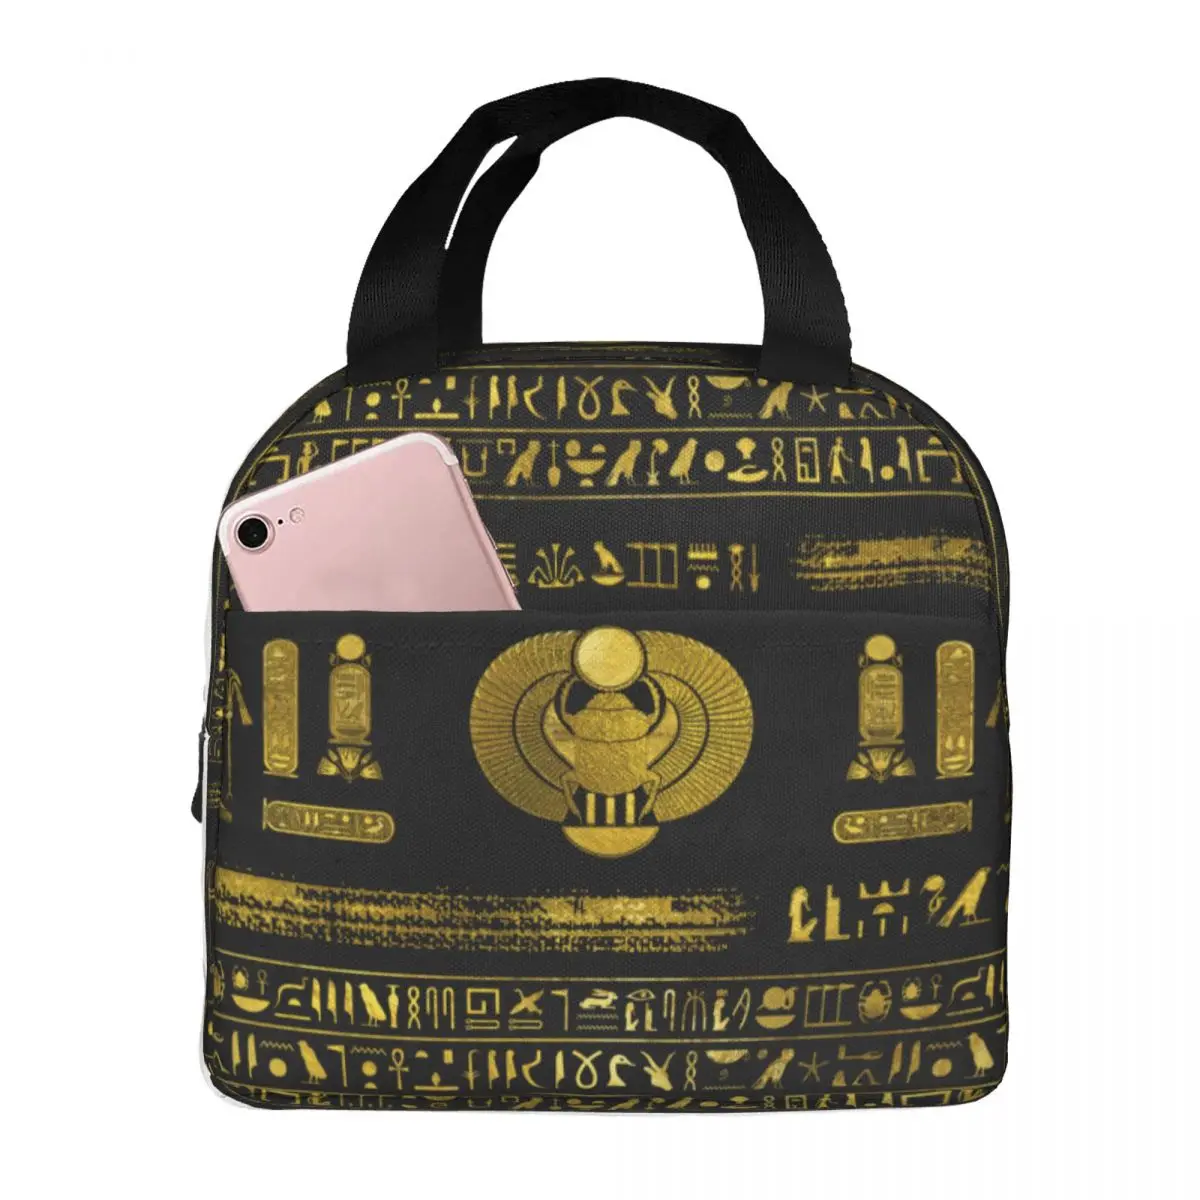 Lunch Bags for Men Women Golden Egyptian Scarab Thermal Cooler Bags Portable Picnic School Egypt Pharaoh Ethnic Canvas Tote